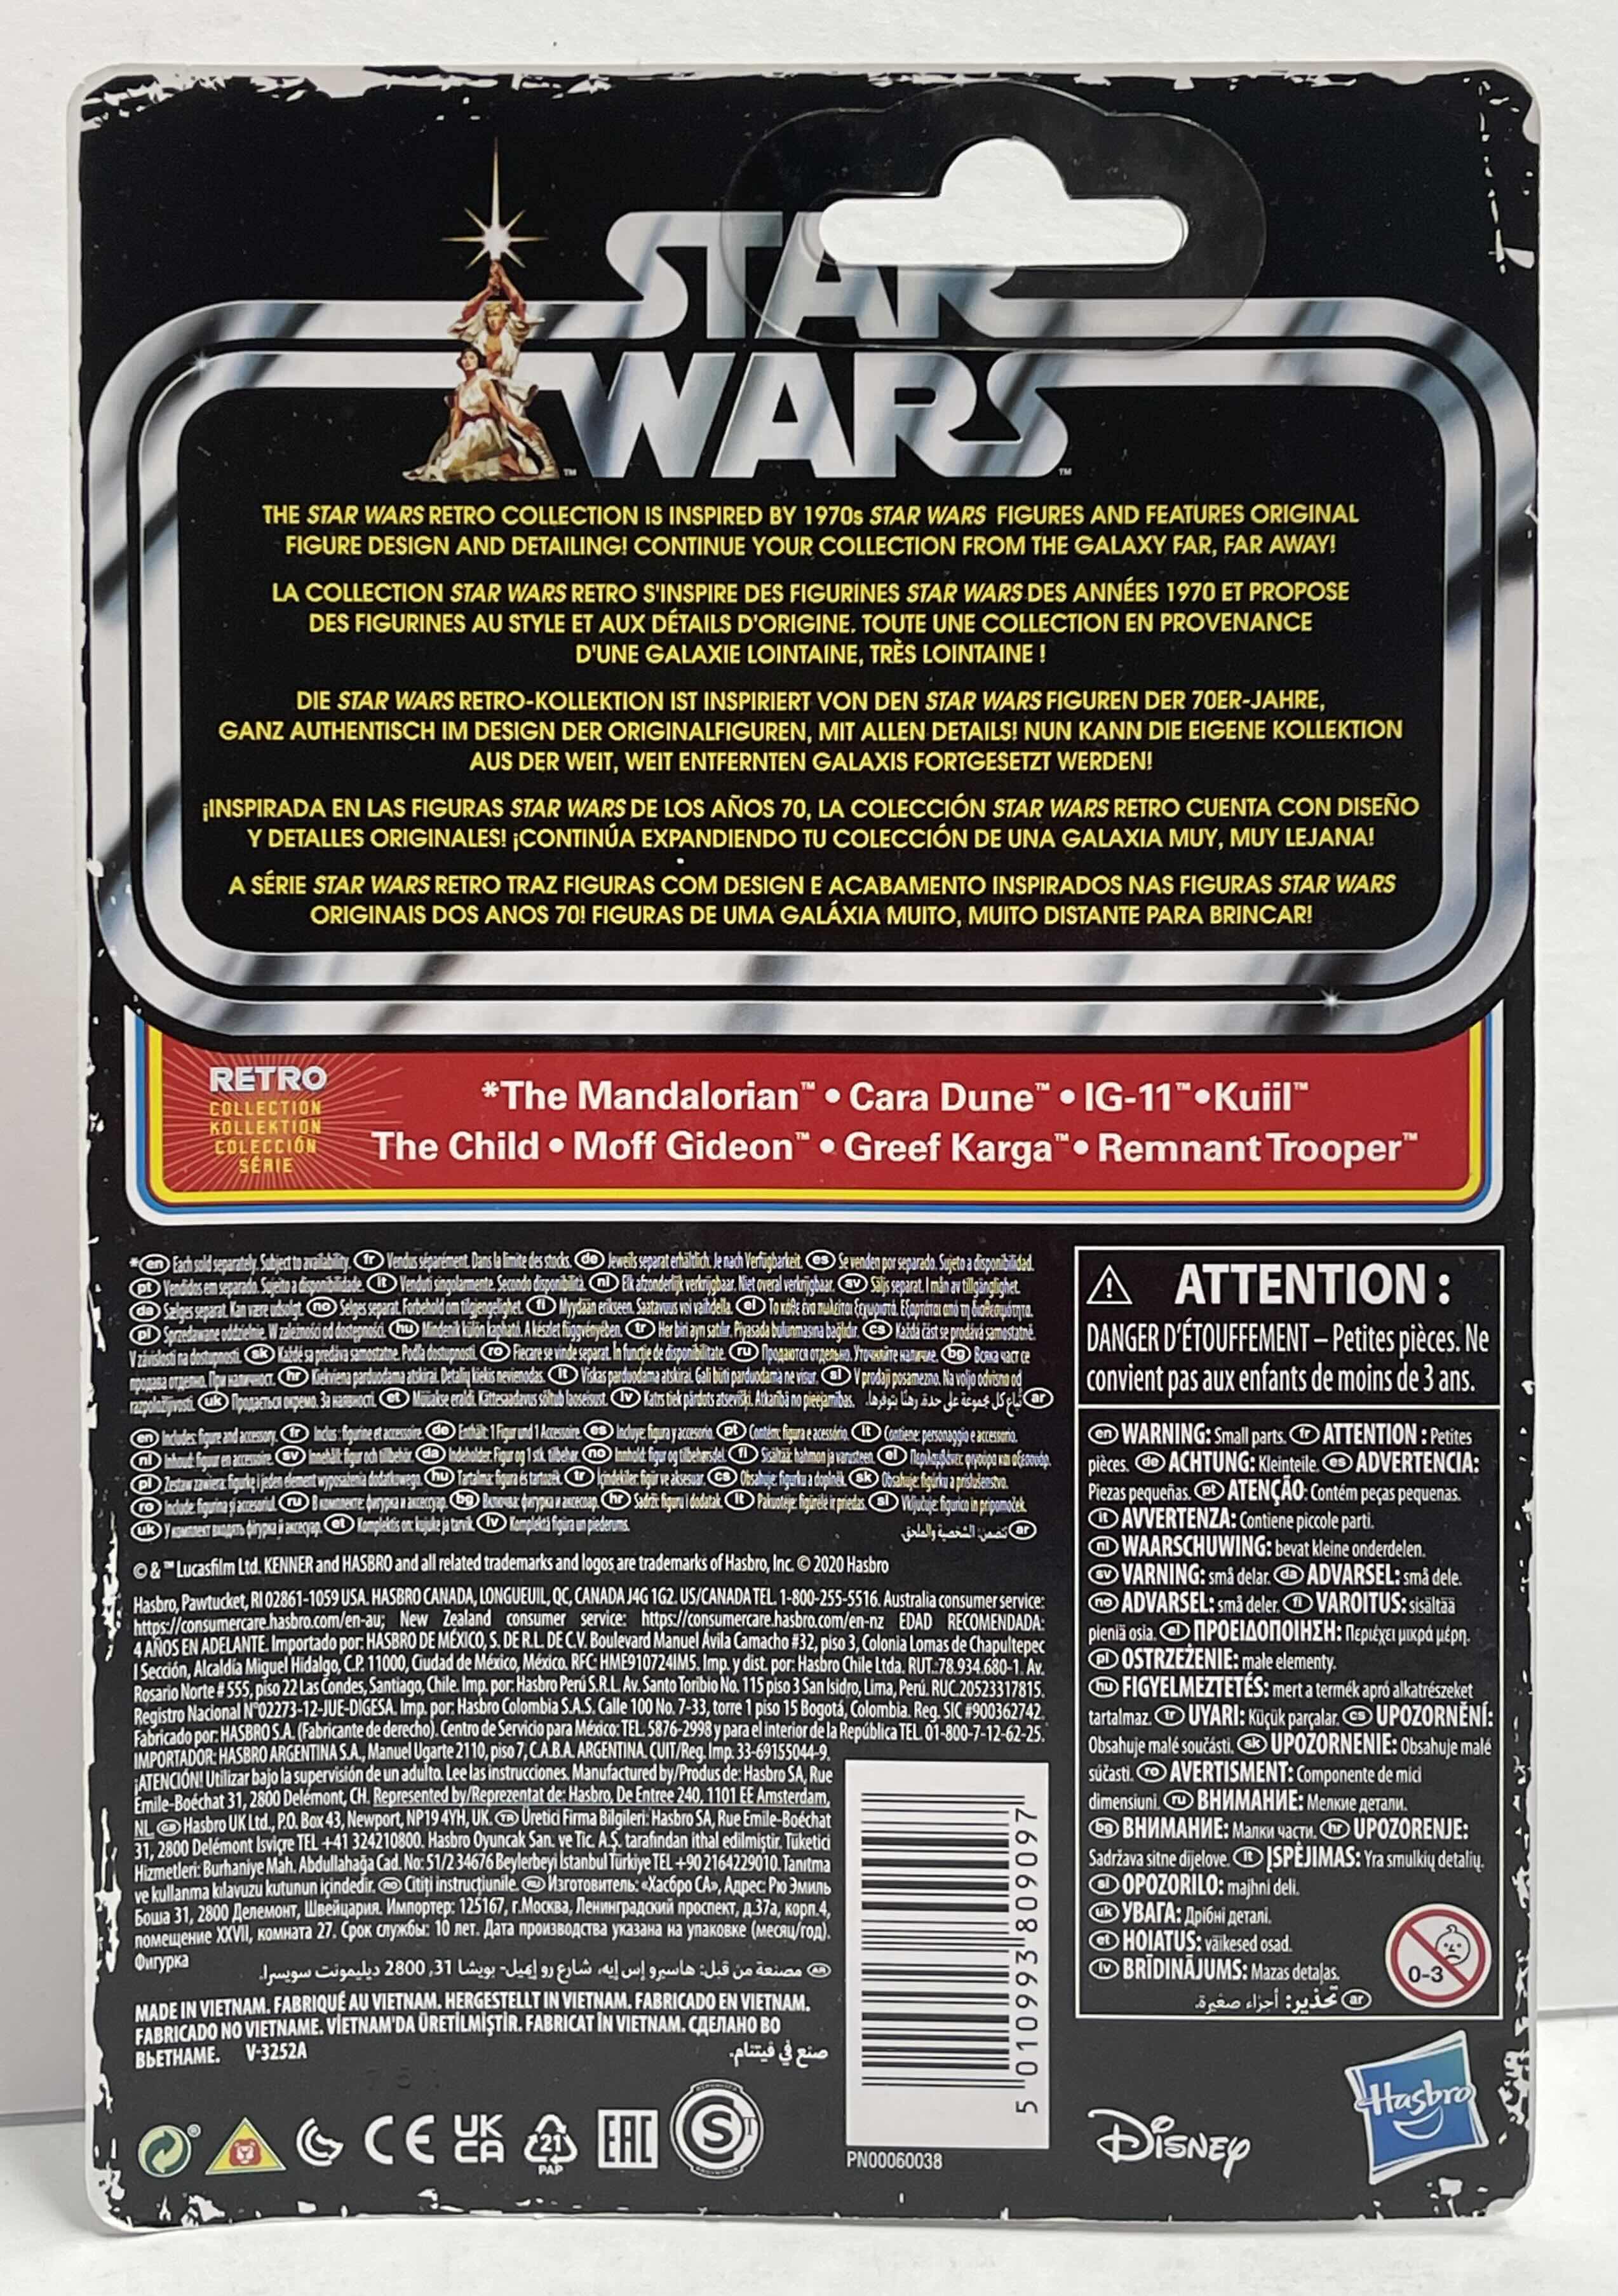 Photo 2 of NIB STAR WARS THE RETRO COLLECTION “IG-11” ACTION FIGURE – RETAIL PRICE $11.99